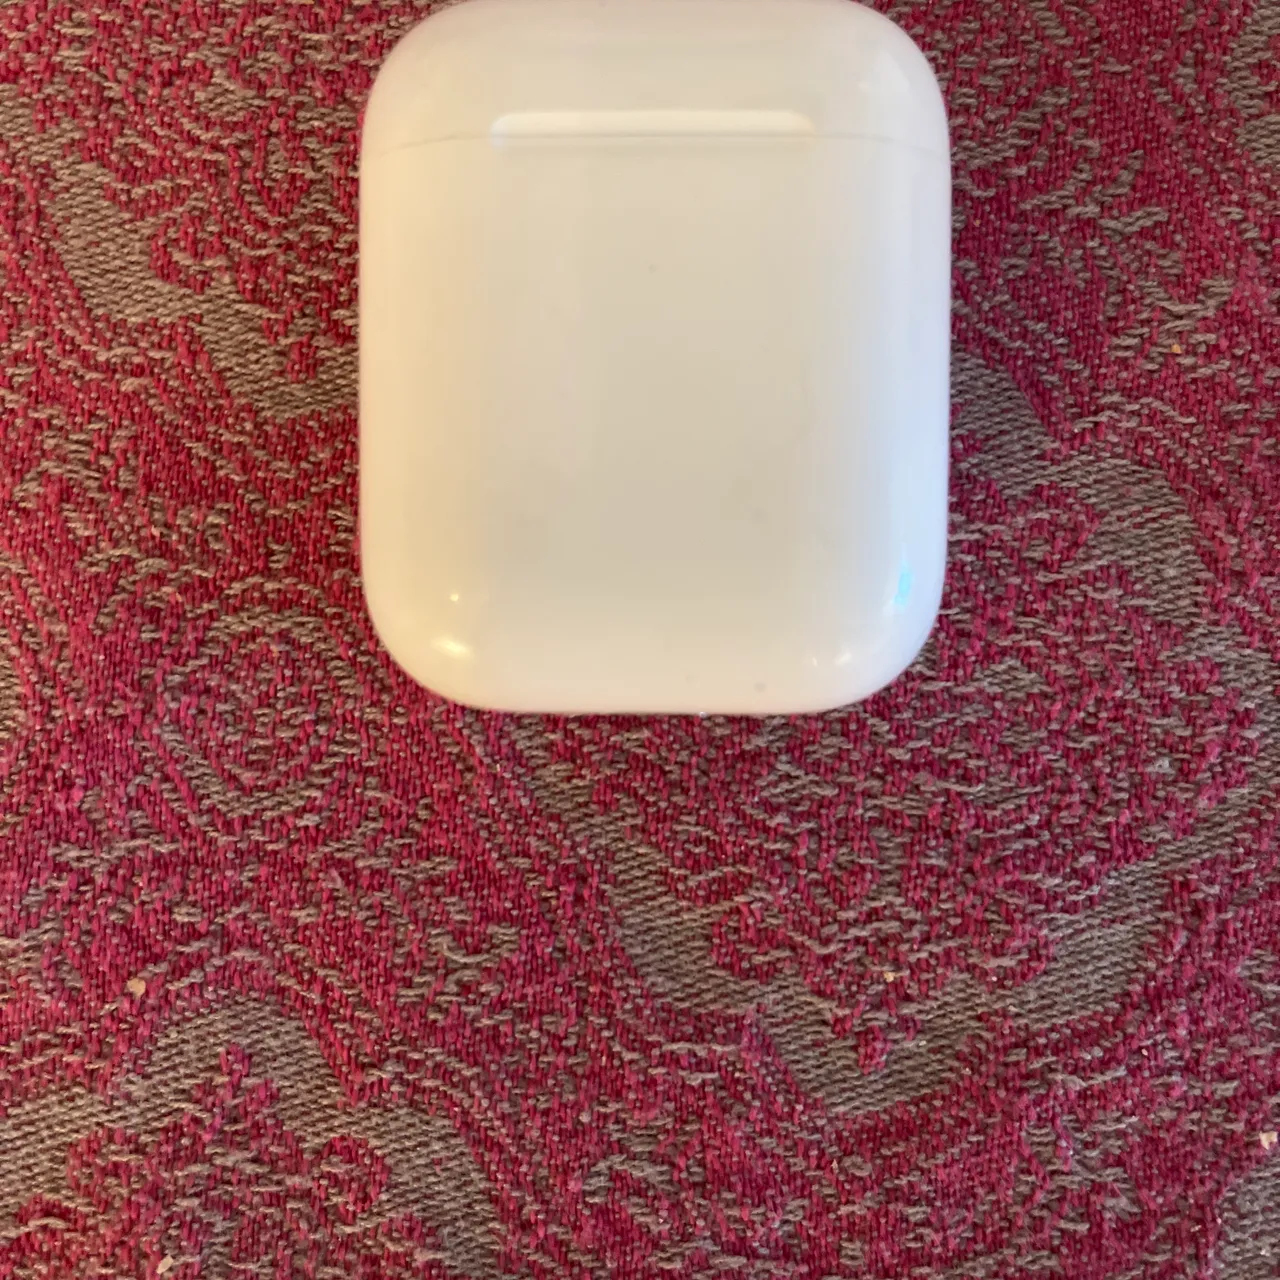 AirPod charging case photo 1